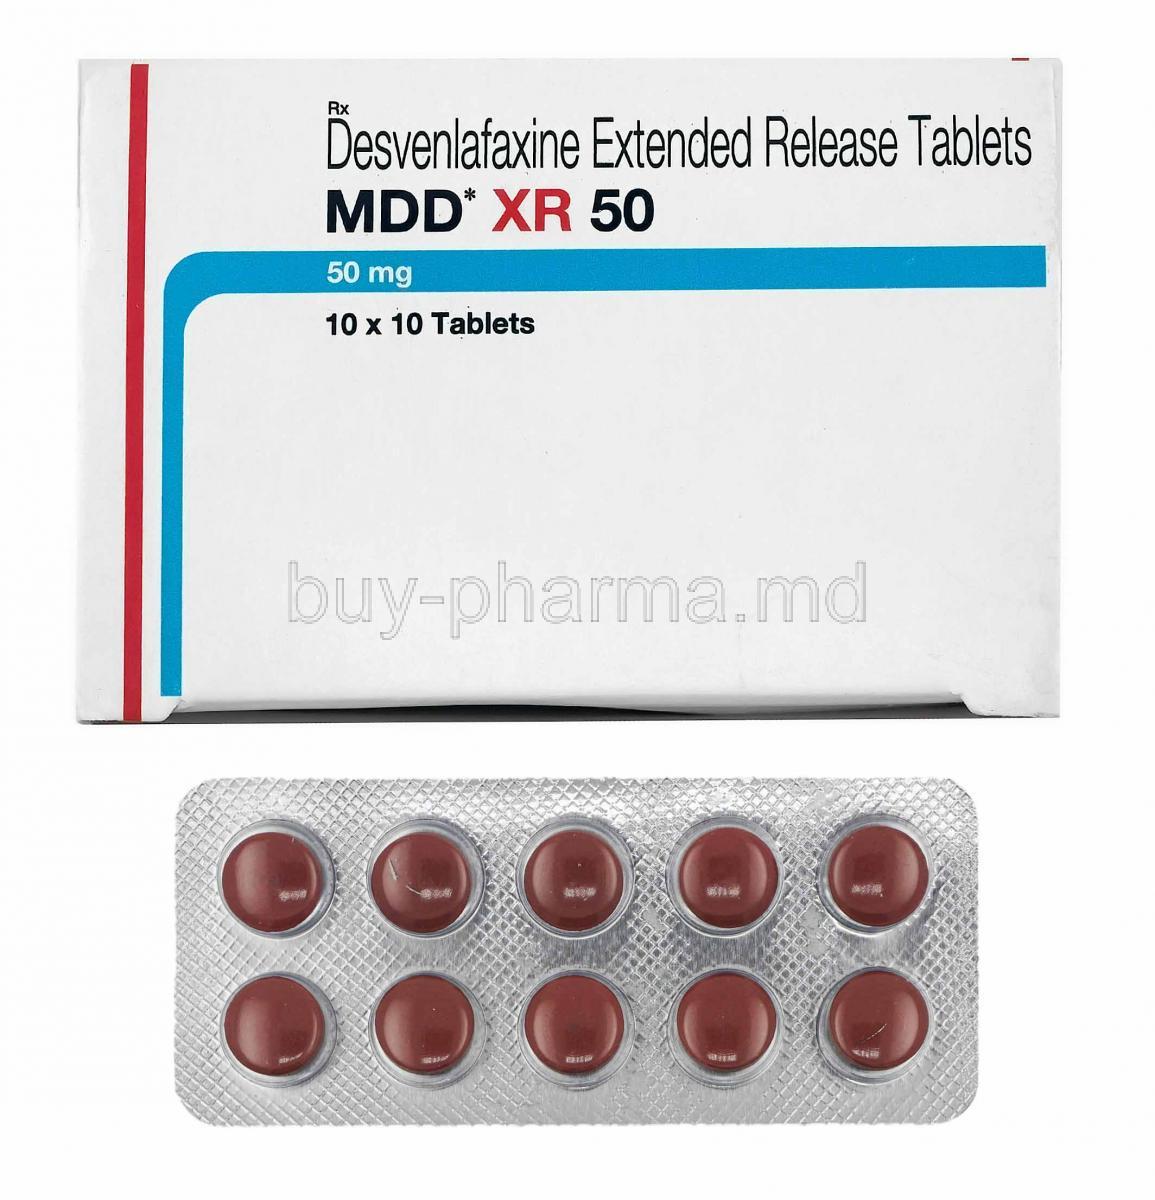 MDD XR, Desvenlafaxine 50mg box and tabelts